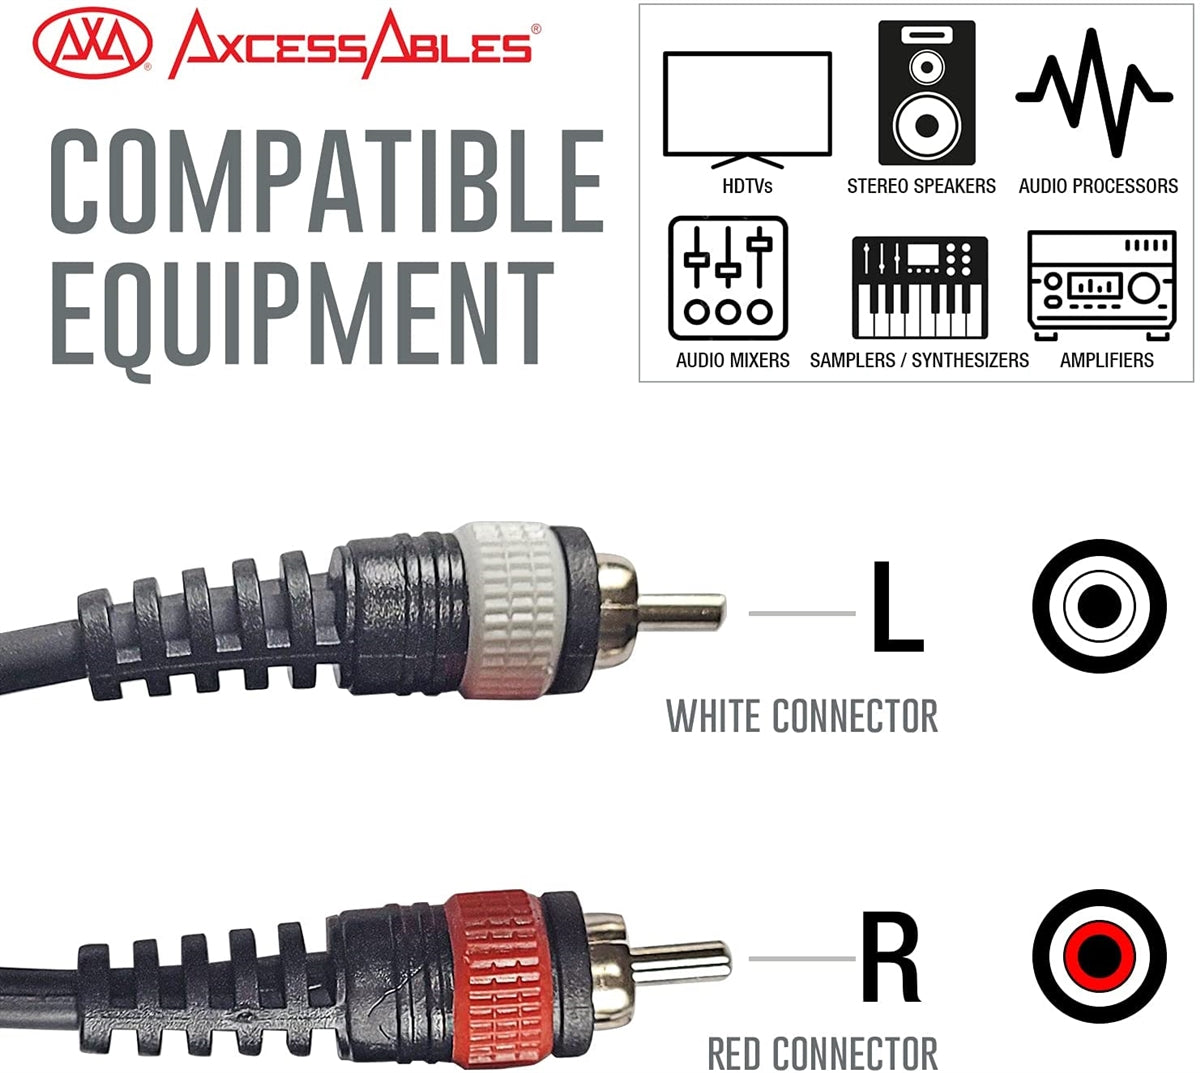 AxcessAbles Dual 1/4 Inch TS to Dual RCA Audio Interconnect Cable 6ft - 4 Pack | Dual 6.35mm Male Jack to Dual RCA | 6ft DTRS to DRCA Unbalanced Patch Cables (4-Pack)